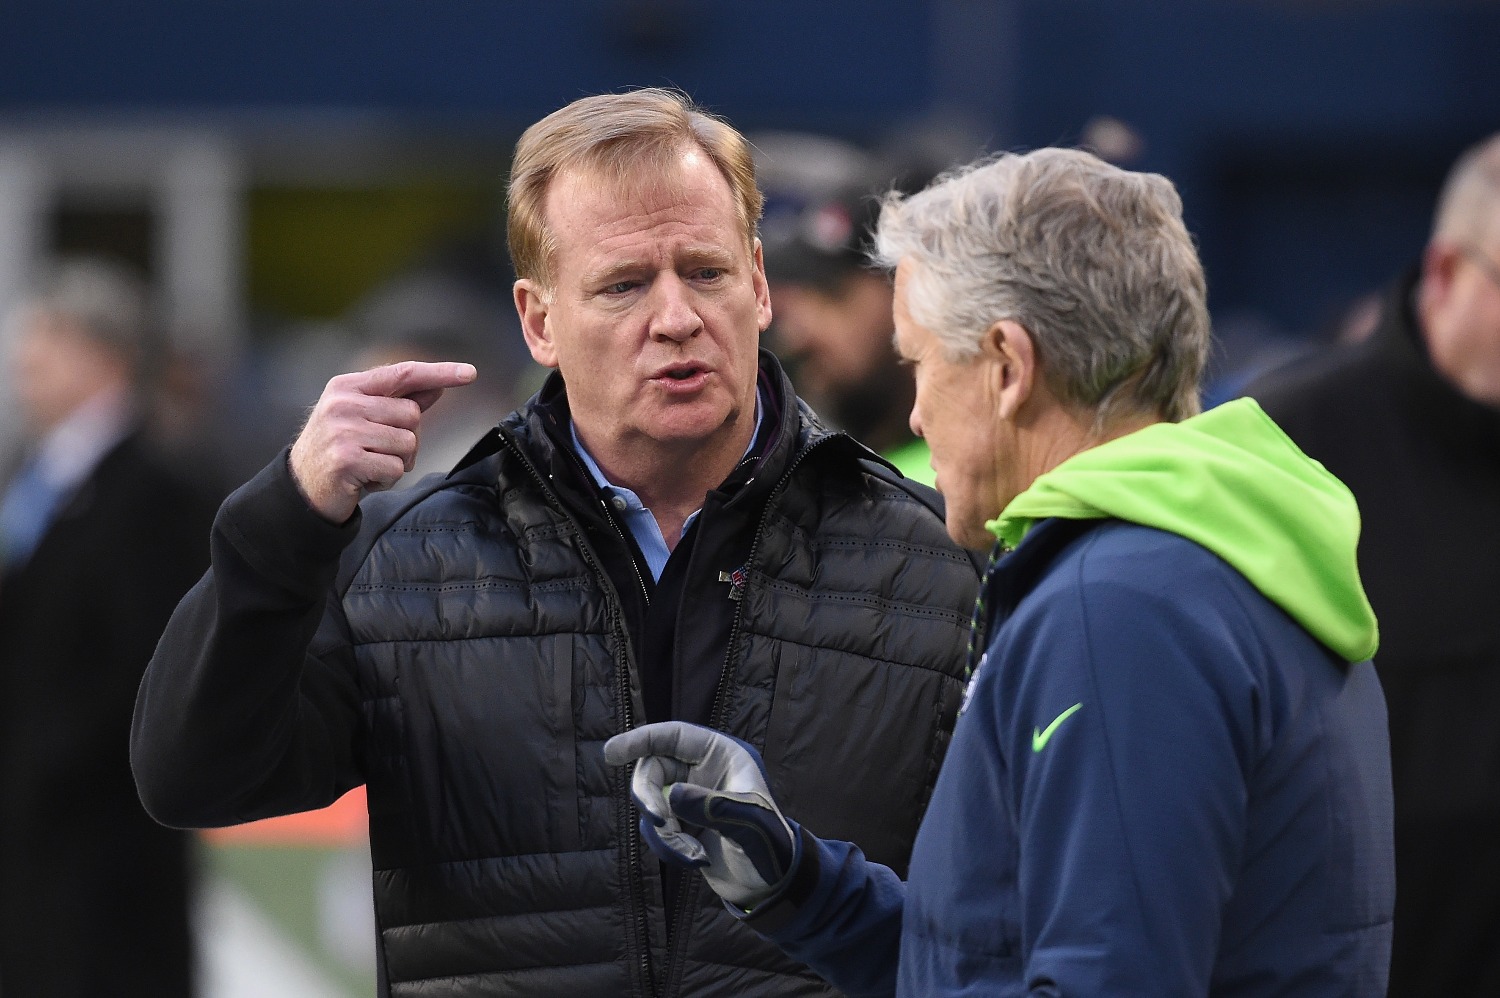 Roger Goodell just taught NFL coaches a $1.75 million COVID-19 lesson.